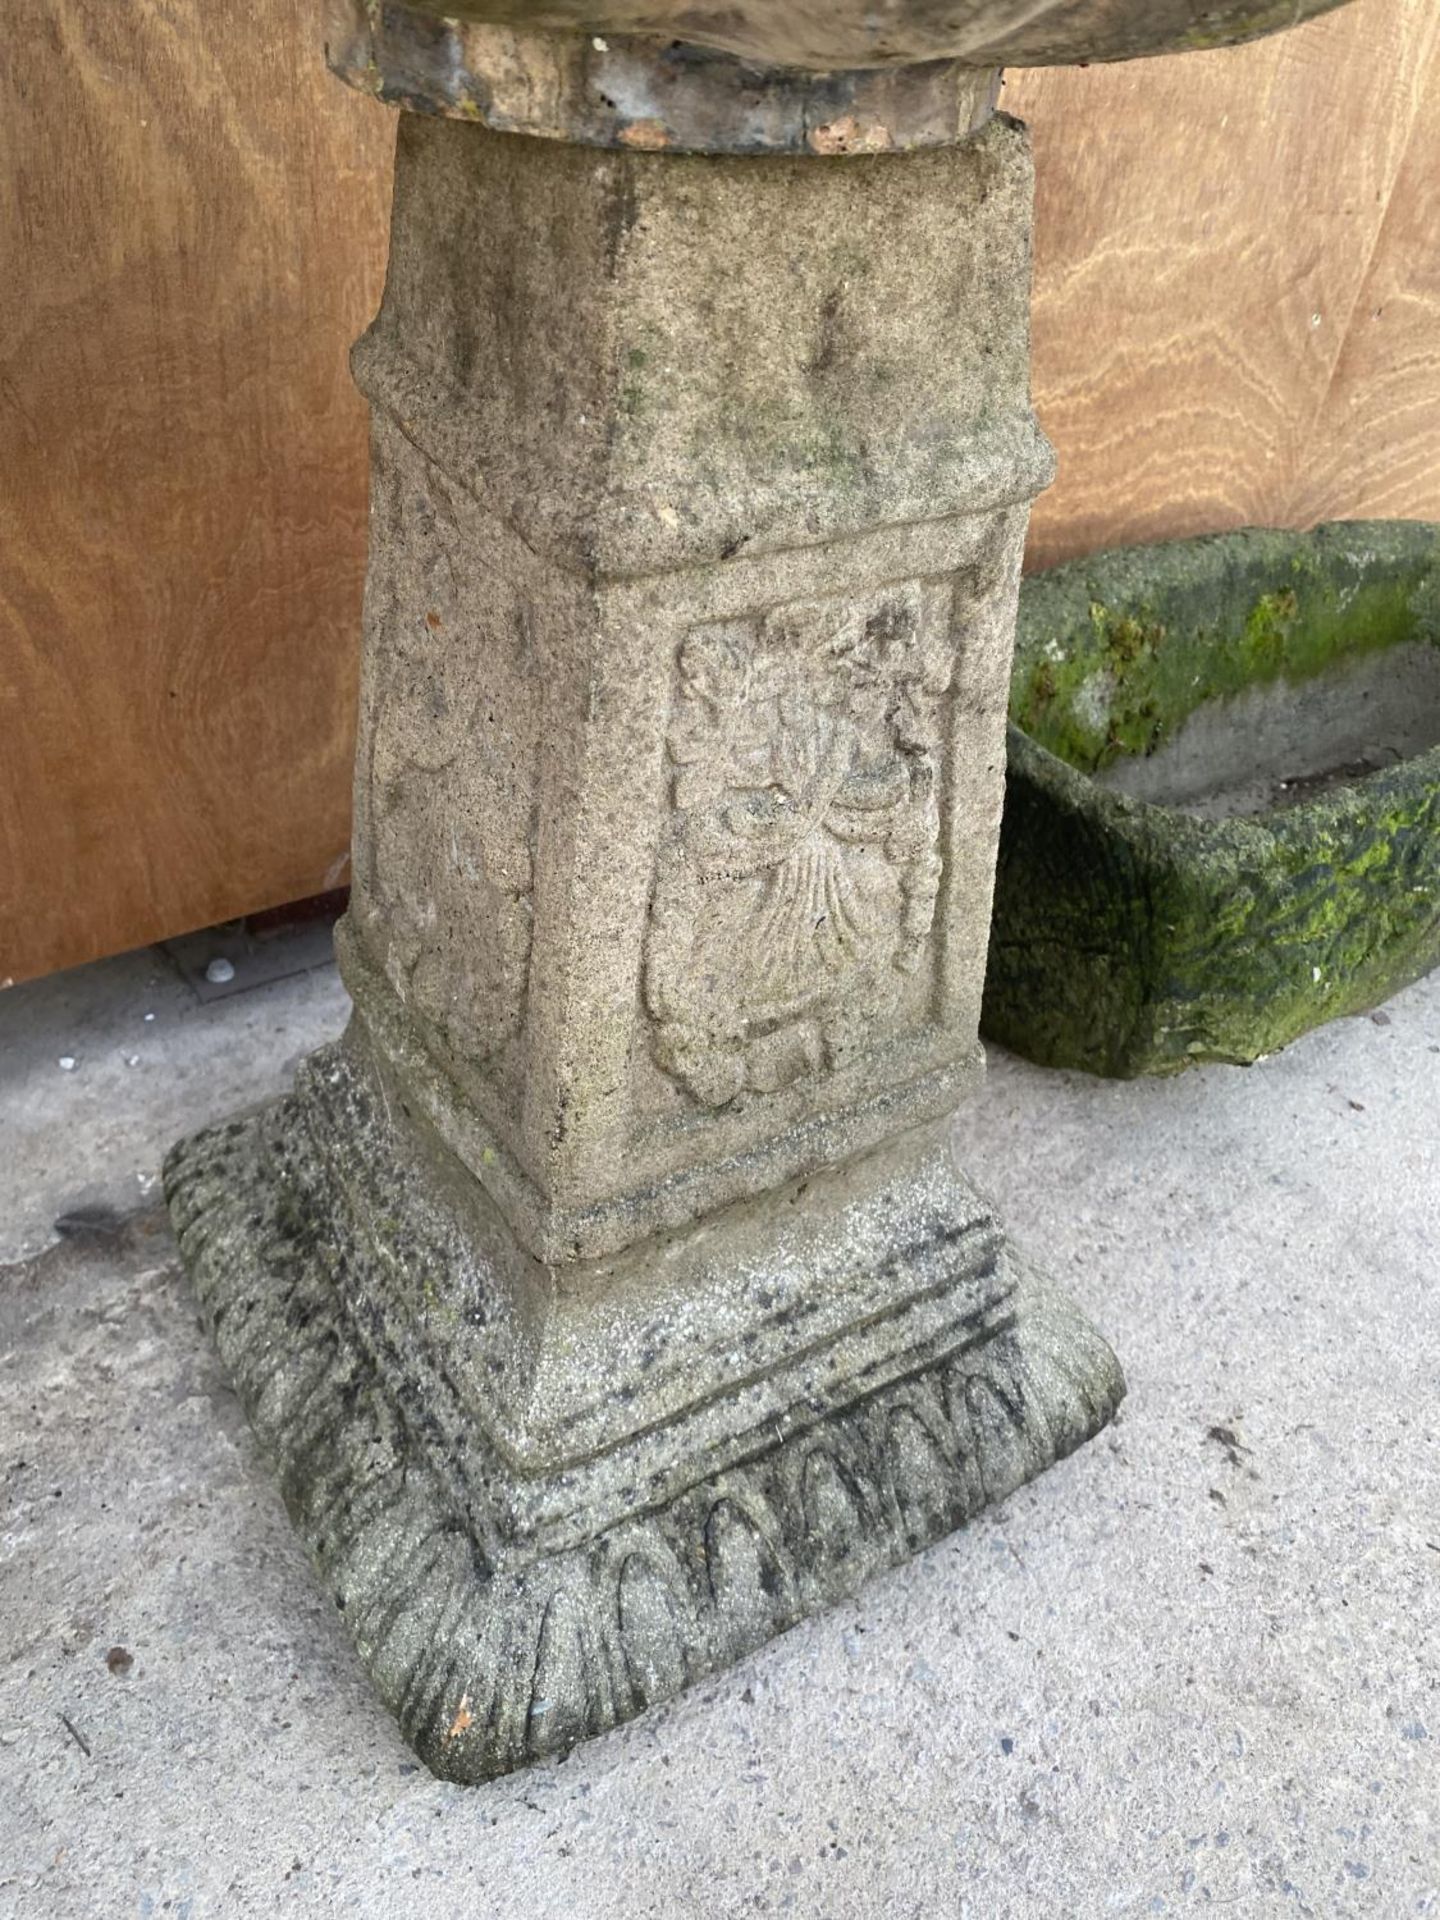 A RECONSTITUTED STONE BIRD BATH WITH PEDASTEL BASE - Image 3 of 3